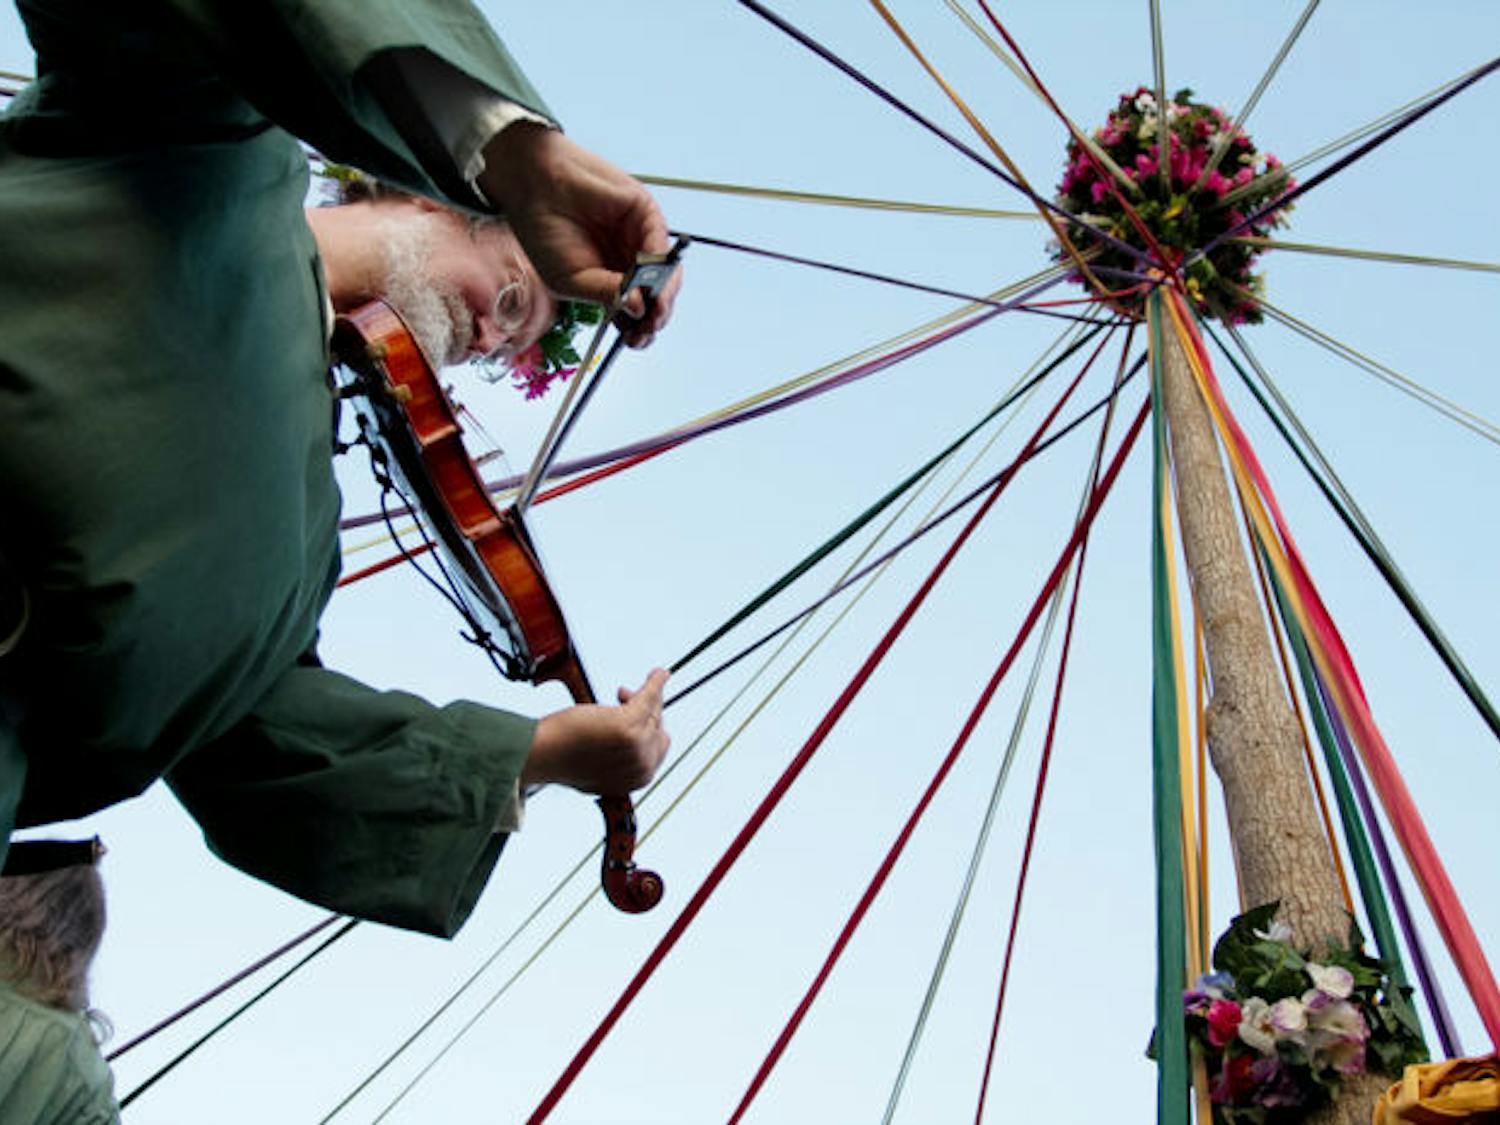 Richard Crew plays the violin underneath a maypole at the Hoggetowne Medieval Faire on Sunday. Crew is part of the Greenwood Morris dance group, a group that organizes dances and plays under the maypole. He said he has been playing the violin and attending various medieval fairs for about 20 years.